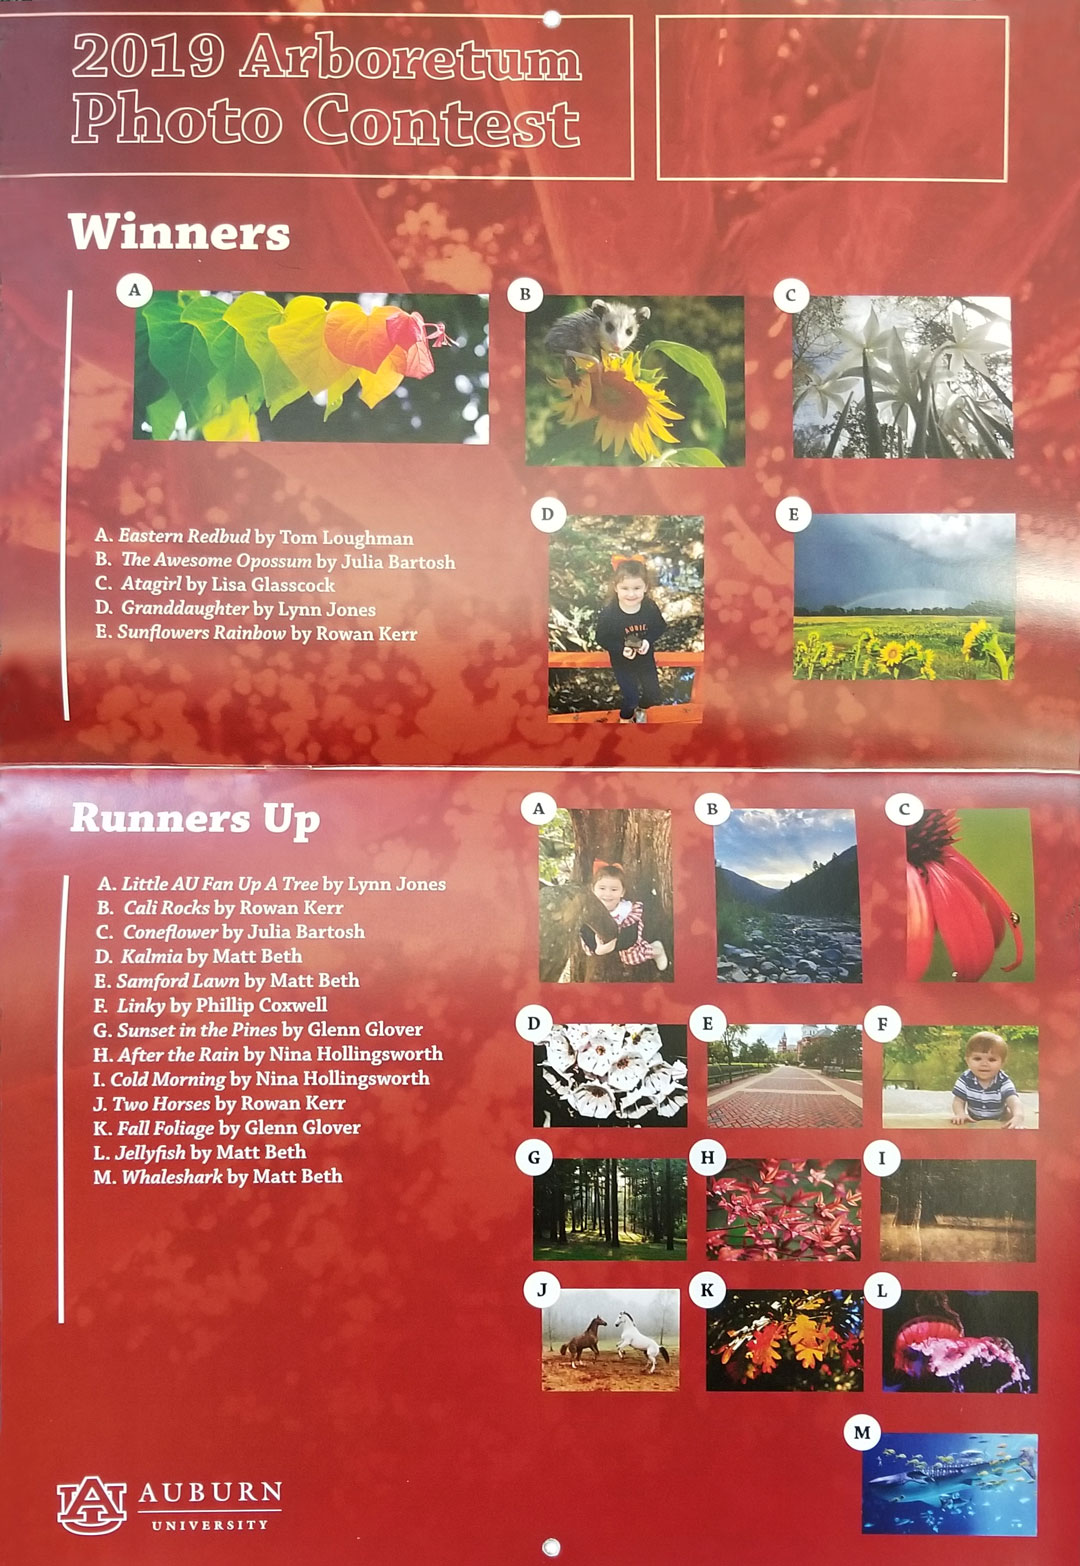 Arboretum 2020 Calendar winners with names and photos. 